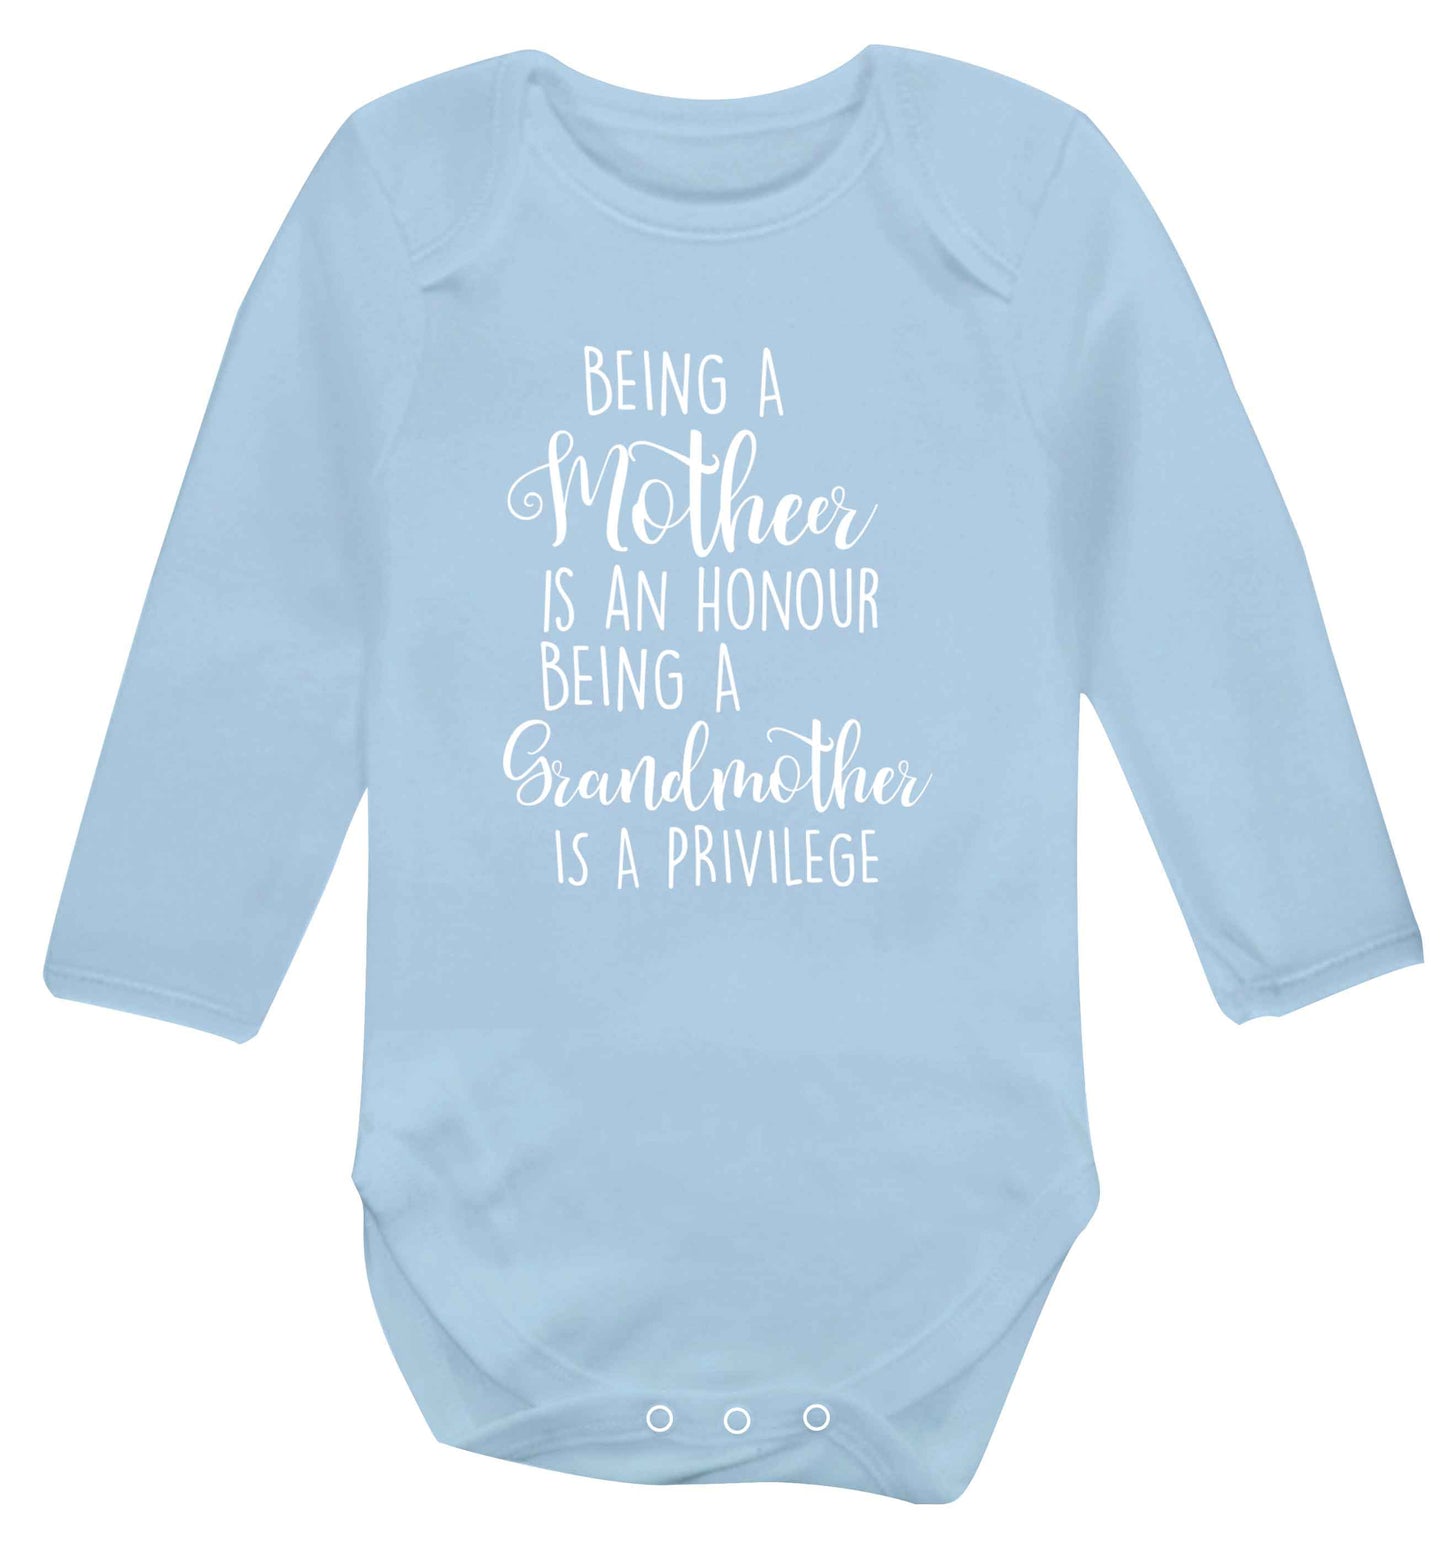 Being a mother is an honour being an grandmother is a privilege Baby Vest long sleeved pale blue 6-12 months